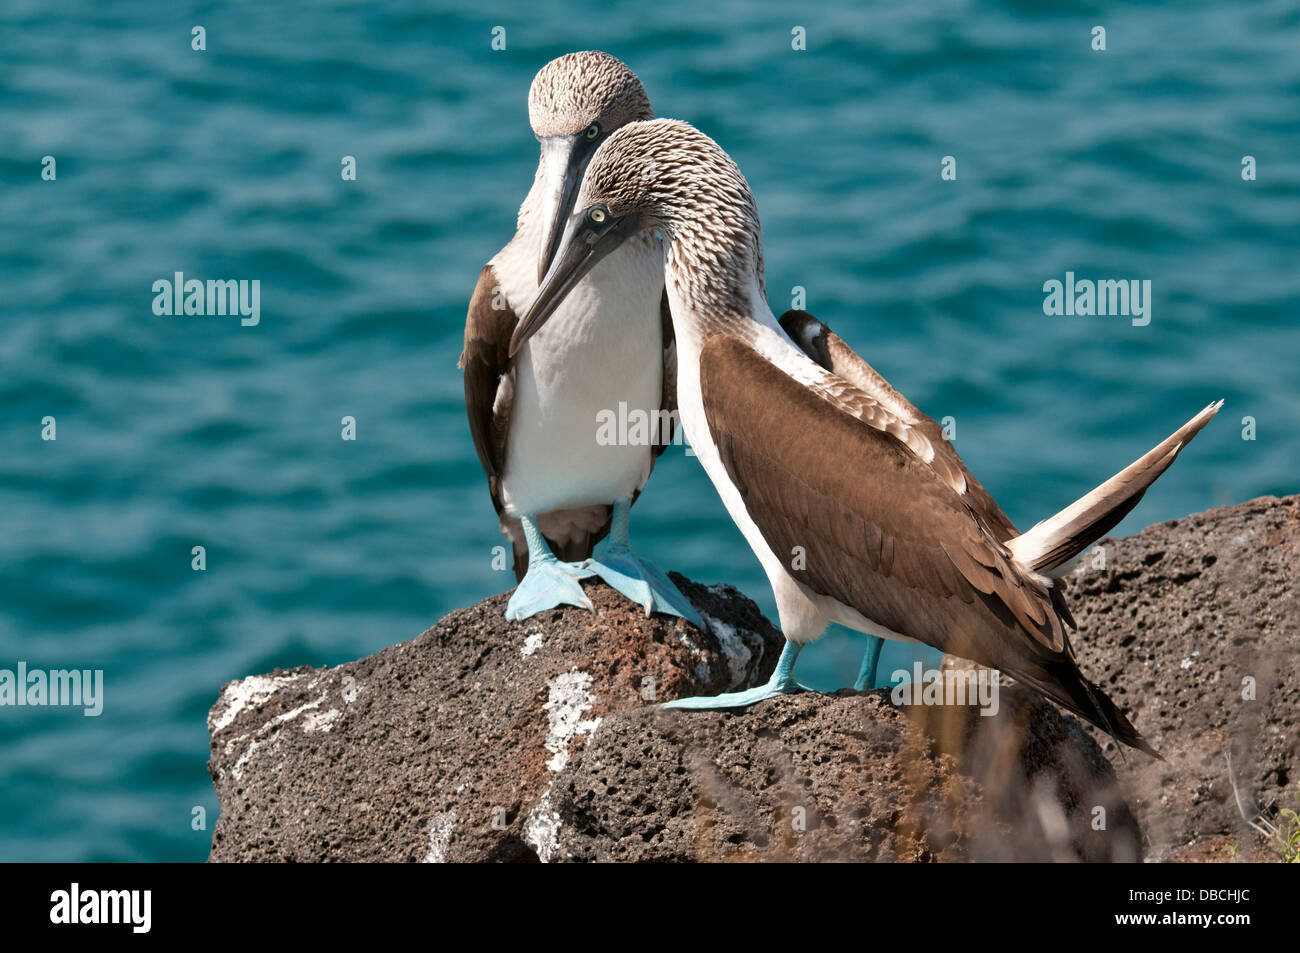 Stock photo of a breeding pair of blue footed boobies. Stock Photo